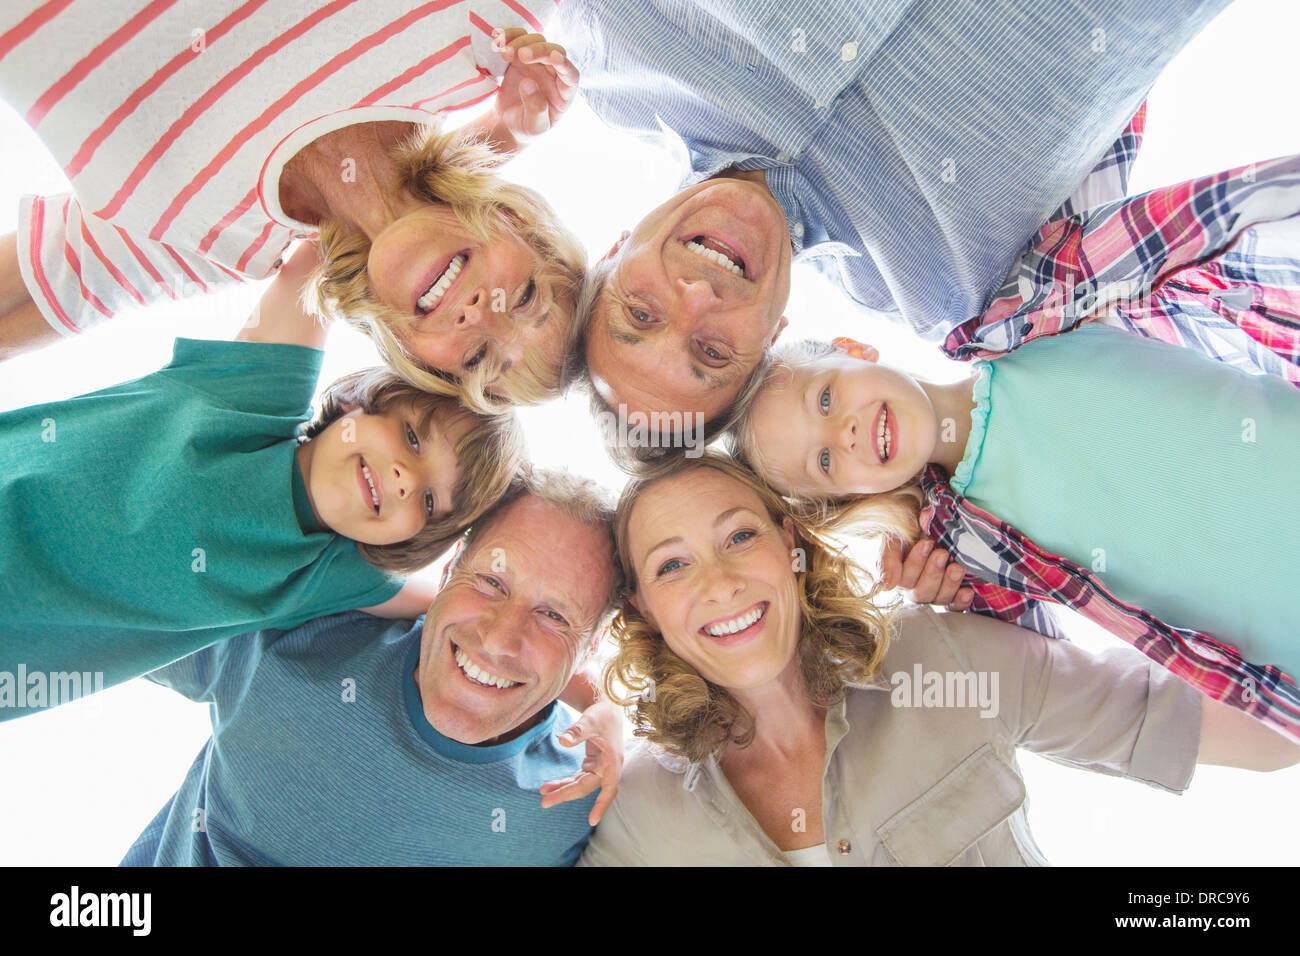 Family smiling together outdoors Banque D'Images